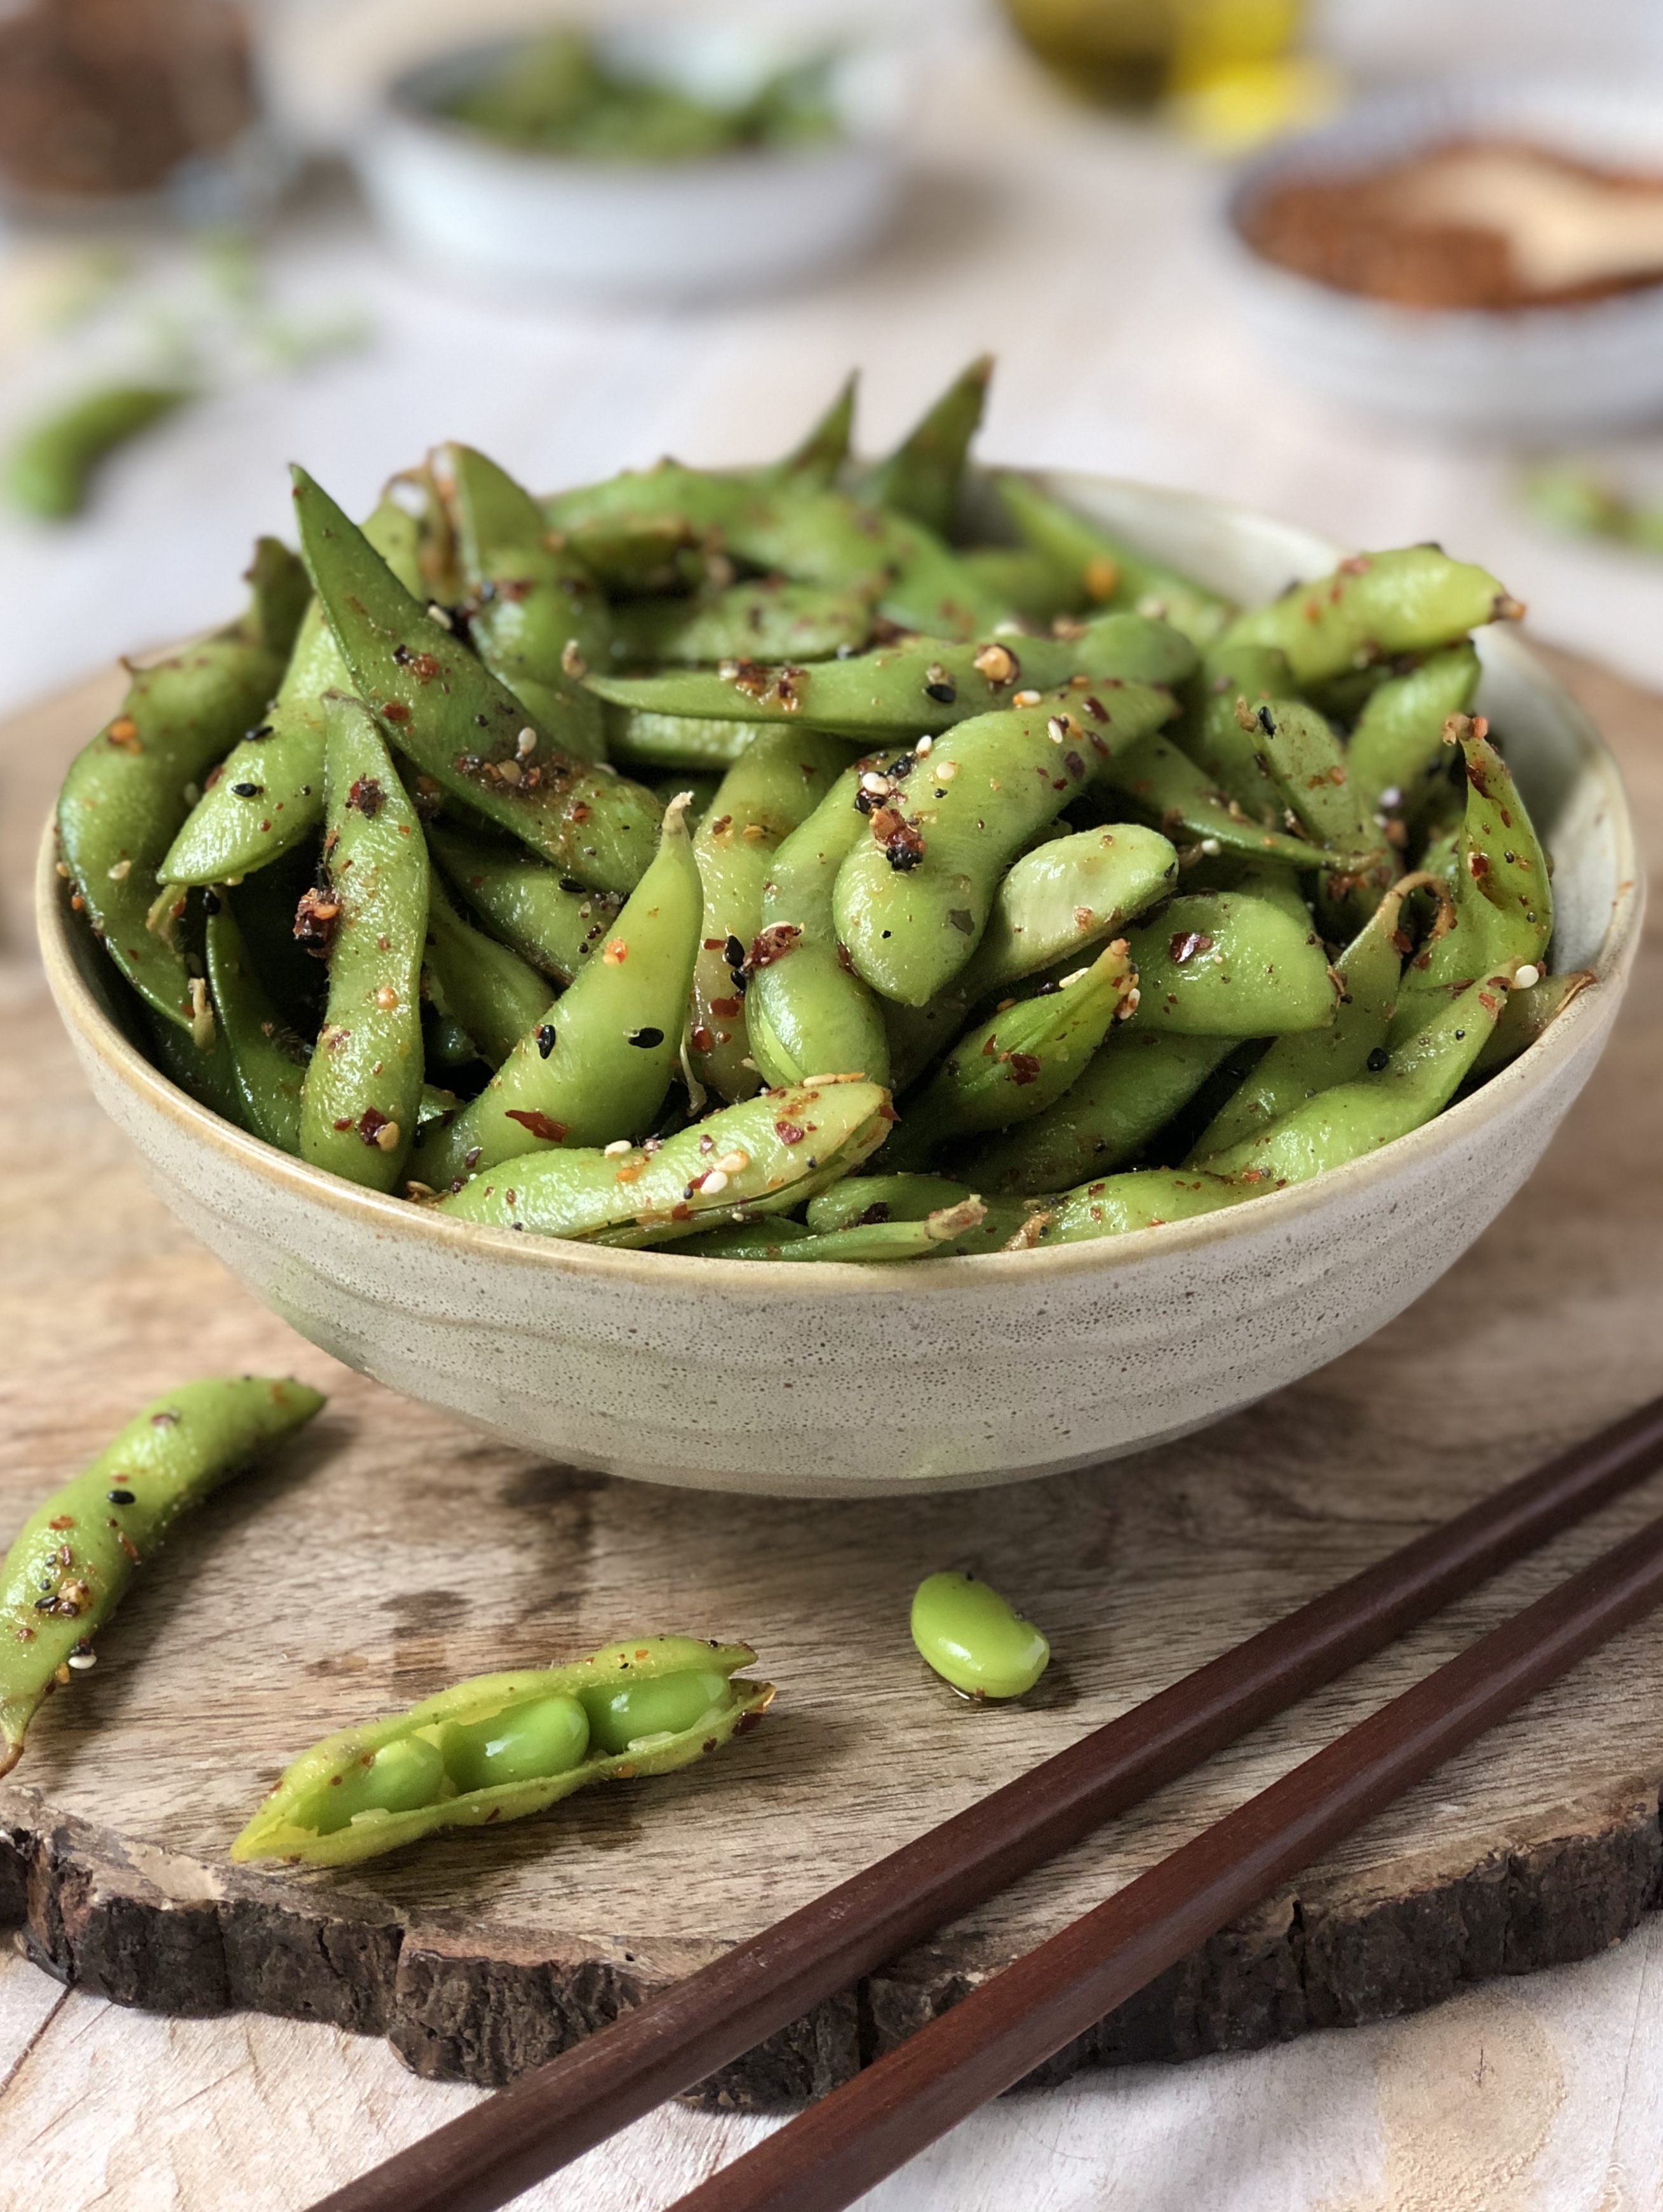 What Is Edamame?